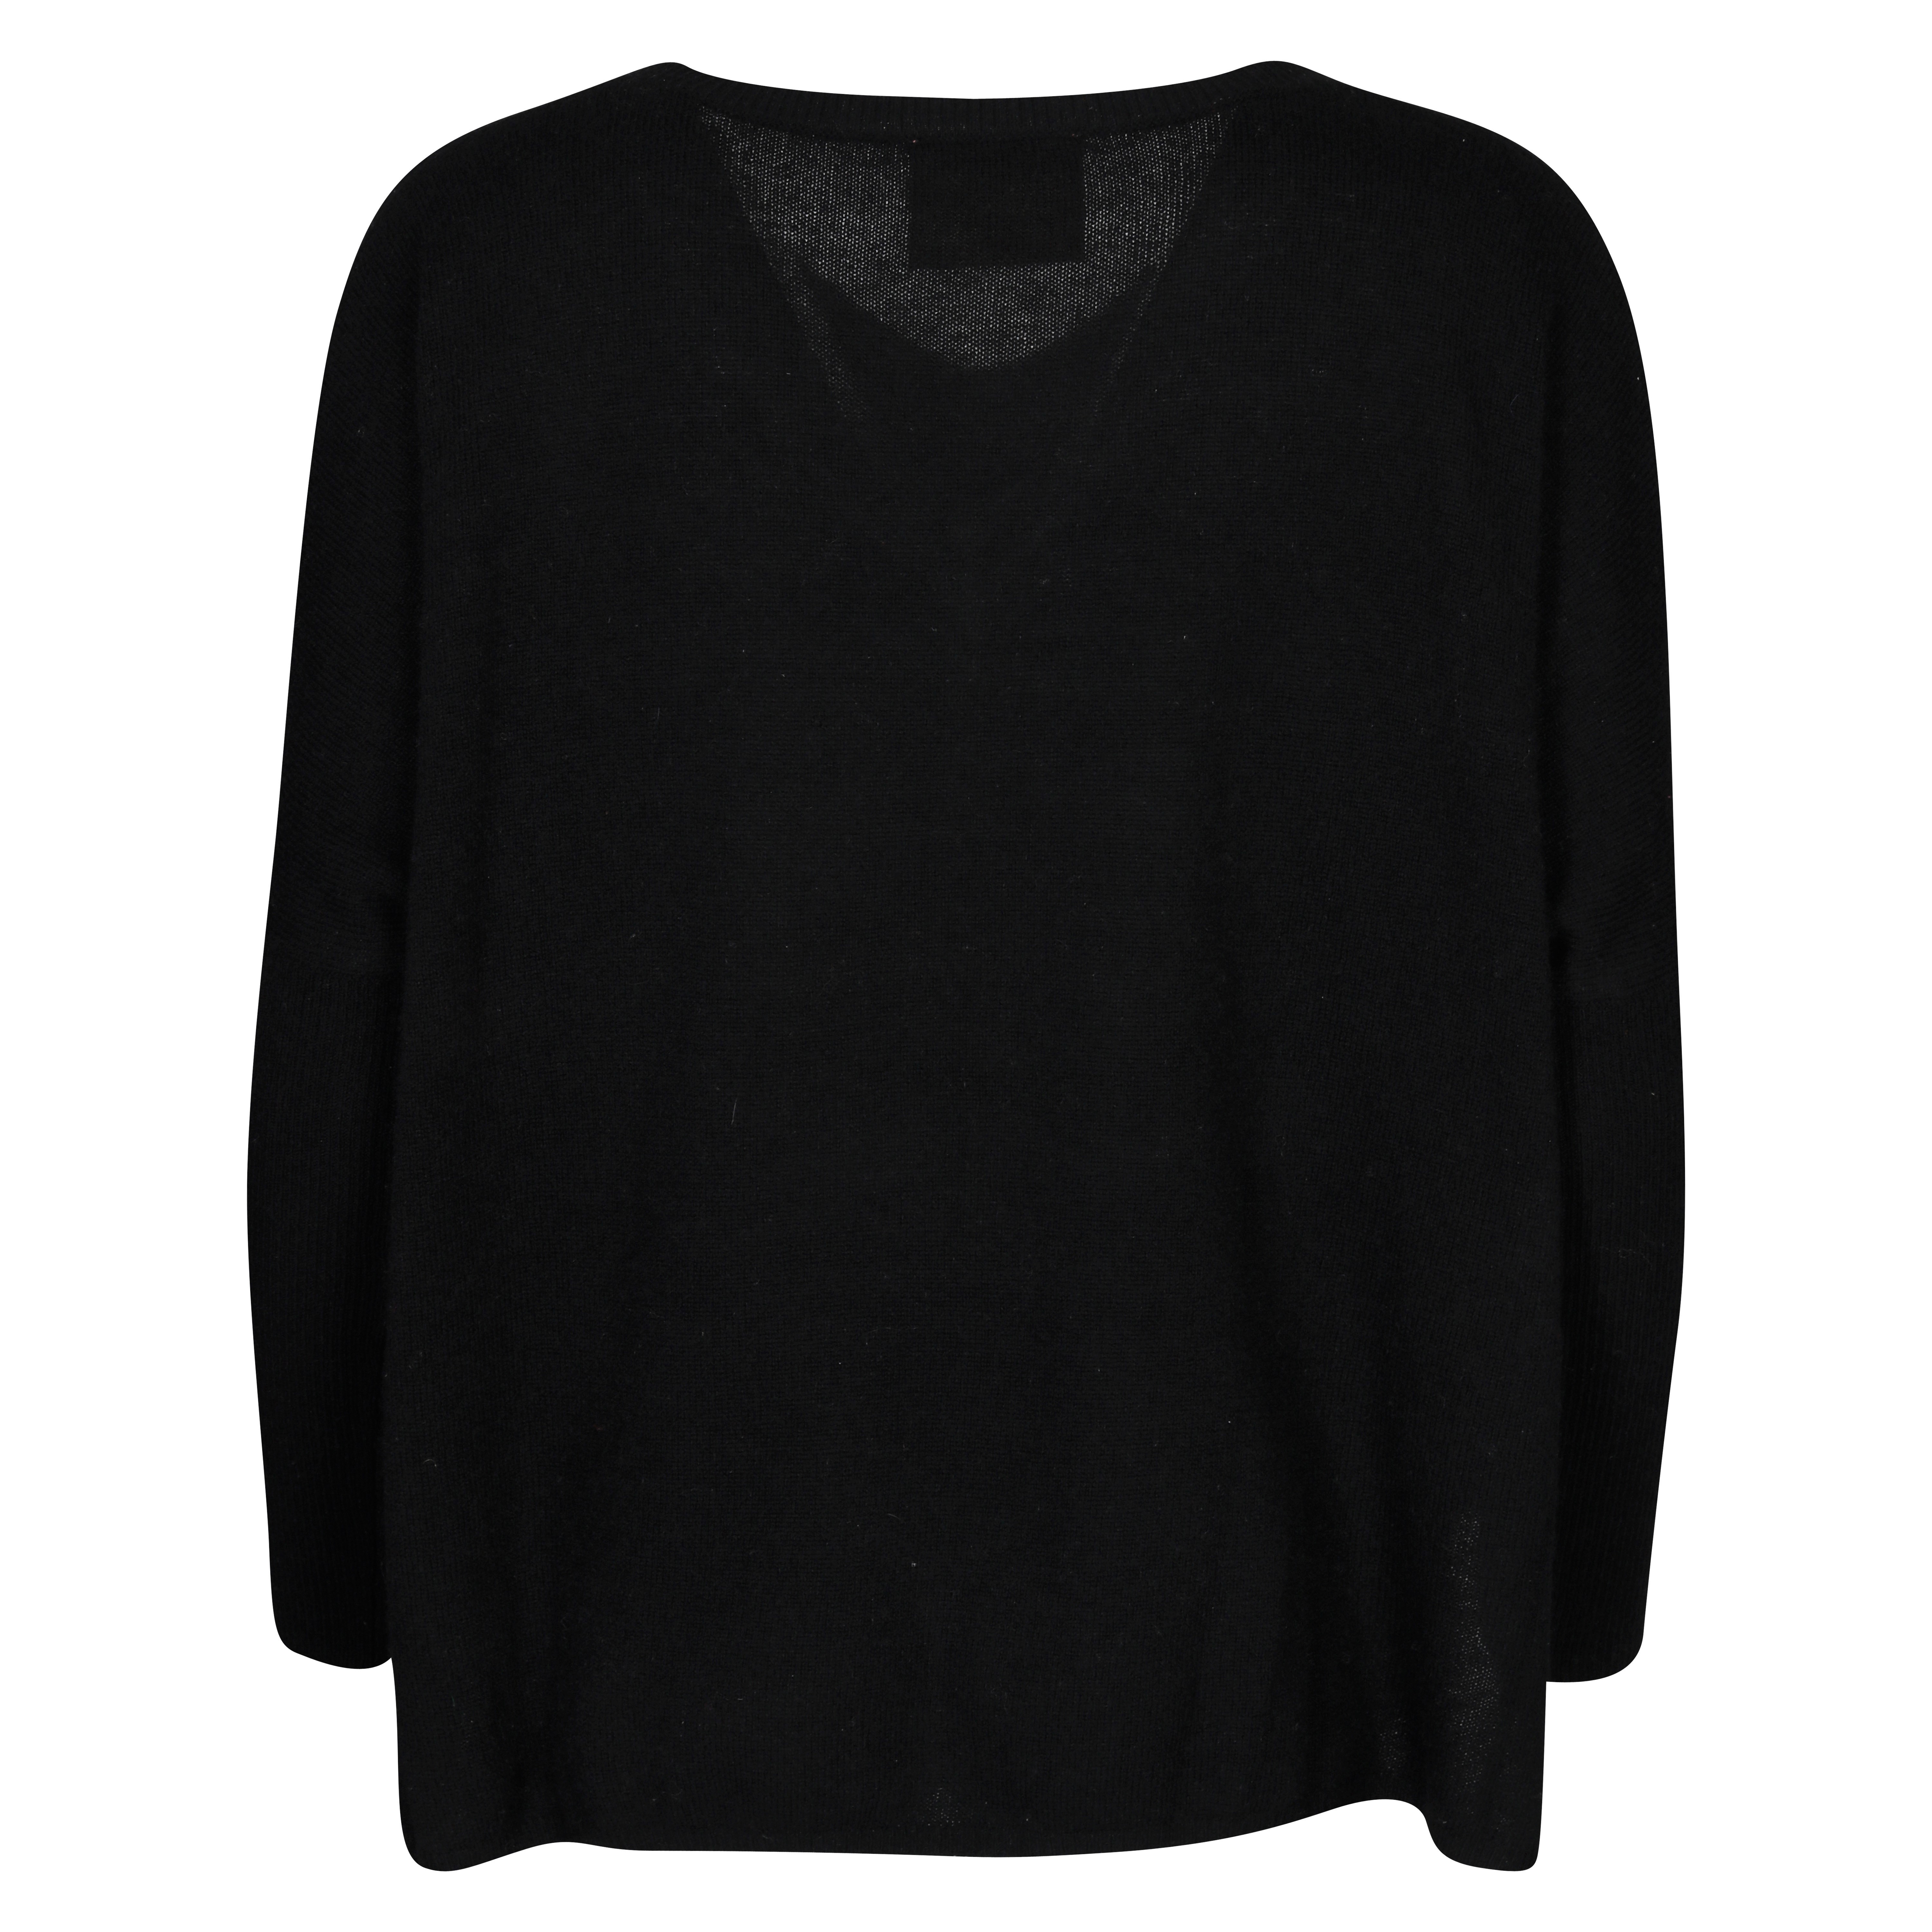 Absolut Cashmere Poncho Sweater in Black